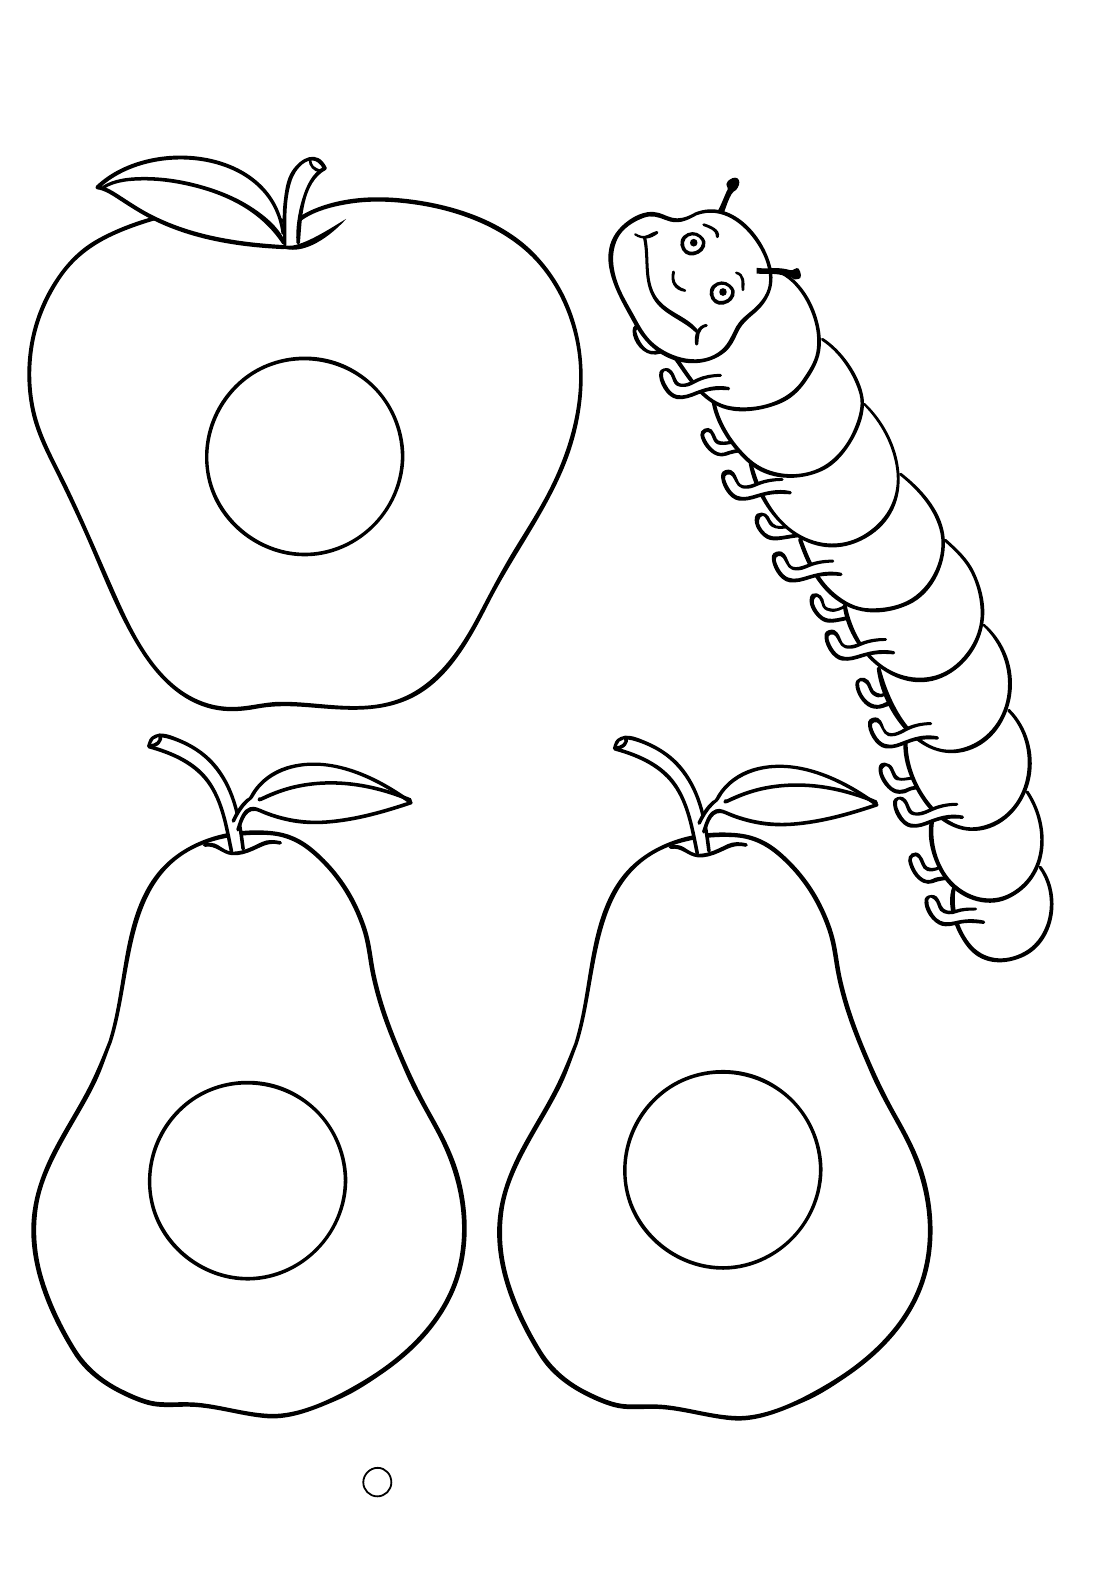 free-printables-for-the-very-hungry-caterpillar-it-is-good-for-teaching